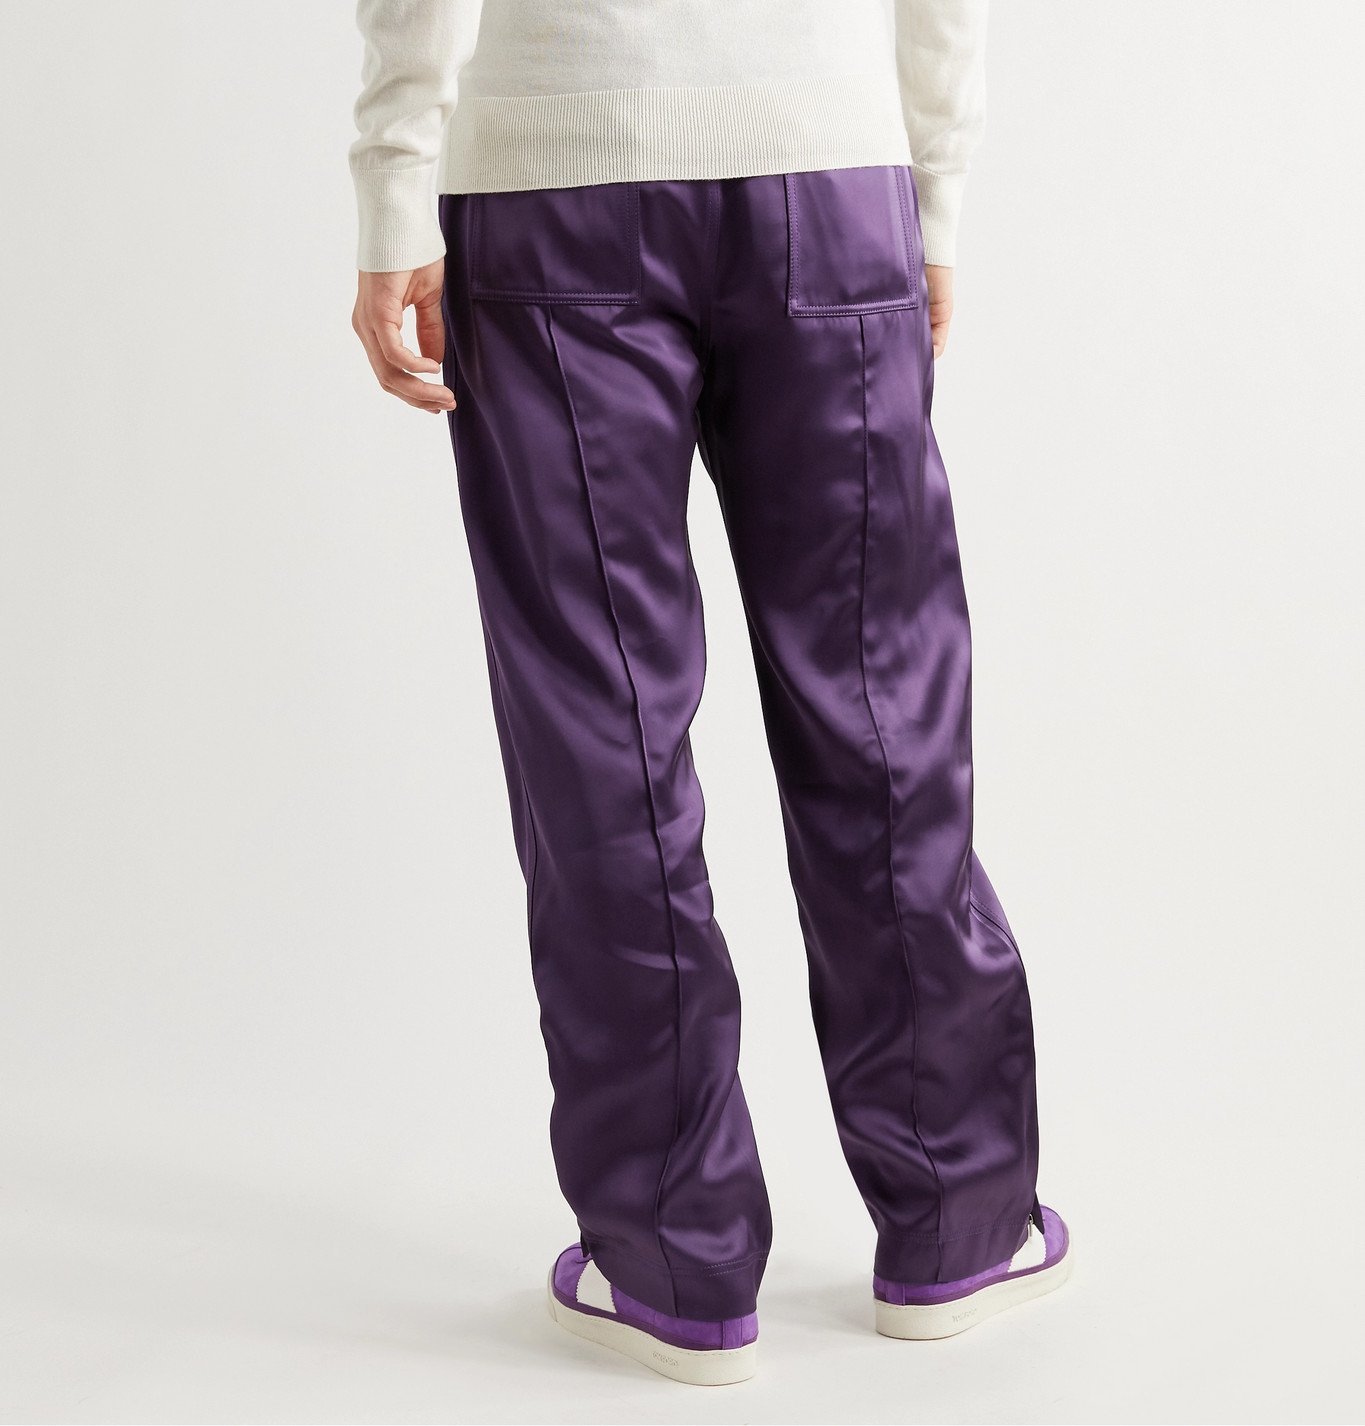 TOM FORD - Satin-Jersey Track Pants - Purple TOM FORD